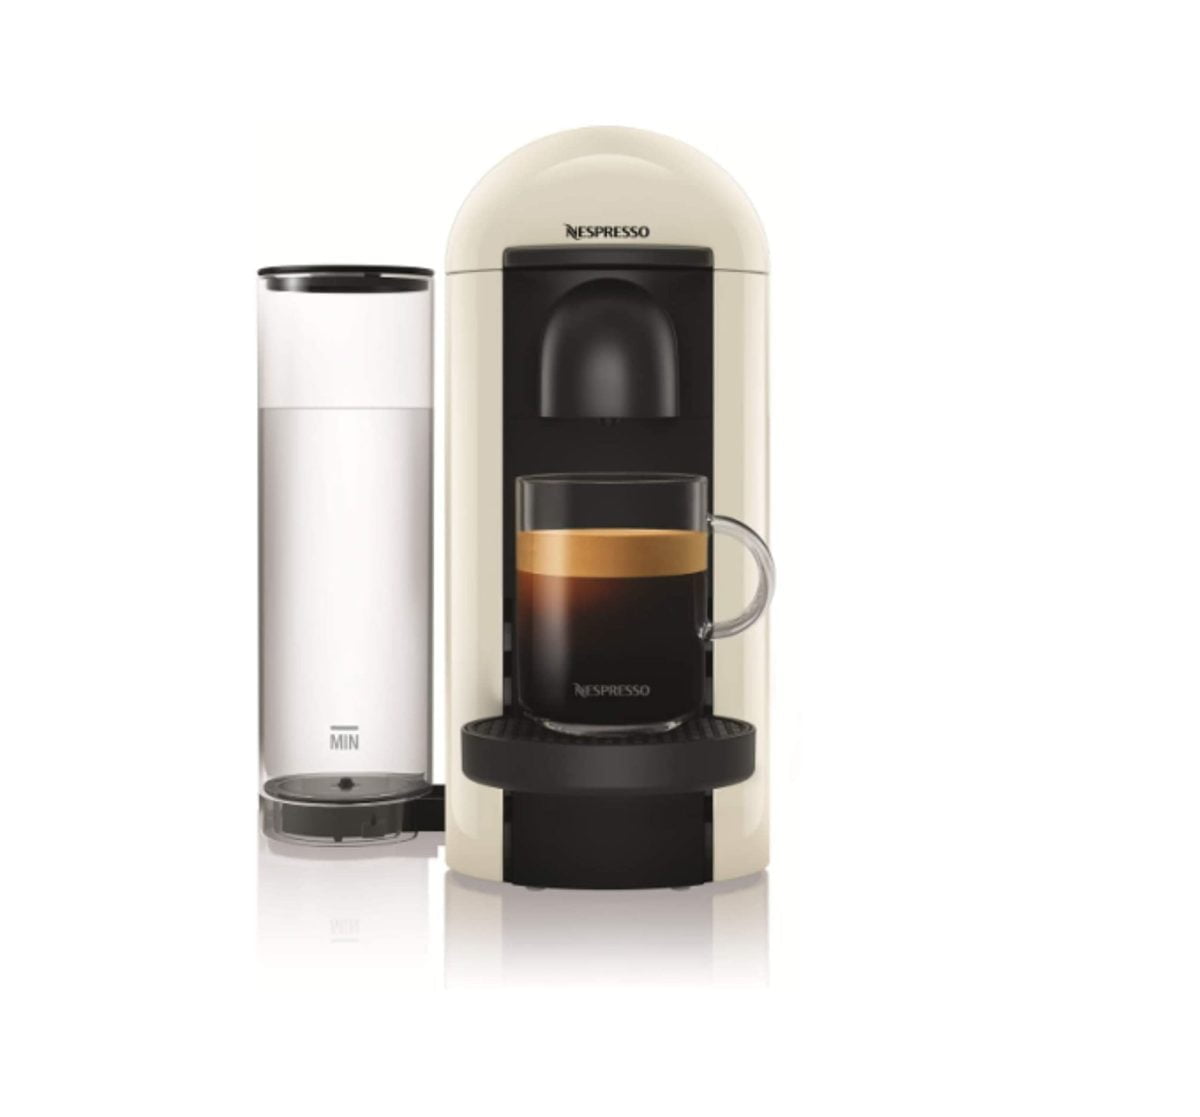 Nespresso &Amp;Lt;H1&Amp;Gt;Nespresso Vertuo Plus Coffee Machine White&Amp;Lt;/H1&Amp;Gt; Https://Www.youtube.com/Watch?V=Q0S8Crgww0Y &Amp;Lt;Ul Class=&Amp;Quot;A-Unordered-List A-Vertical A-Spacing-Mini&Amp;Quot;&Amp;Gt; &Amp;Lt;Li&Amp;Gt;&Amp;Lt;Span Class=&Amp;Quot;A-List-Item&Amp;Quot;&Amp;Gt;Versatile Cup Sizes: One Machine For 4 Coffee Sizes, Mug, Gran Lungo, Double Espresso, And Espresso Via 3 Different Capsule Sizes. Large Capsule For Mug, Medium For Gran Lungo And Double Espresso, And A Small One For Espresso.&Amp;Lt;/Span&Amp;Gt;&Amp;Lt;/Li&Amp;Gt; &Amp;Lt;Li&Amp;Gt;&Amp;Lt;Span Class=&Amp;Quot;A-List-Item&Amp;Quot;&Amp;Gt;Perfect In Cup Results Every Time: Freshly Brewed Coffee, With Naturally Formed Crema And Full Bodied Coffee.&Amp;Lt;/Span&Amp;Gt;&Amp;Lt;/Li&Amp;Gt; &Amp;Lt;Li&Amp;Gt;&Amp;Lt;Span Class=&Amp;Quot;A-List-Item&Amp;Quot;&Amp;Gt;High Convenience And Flexibility: Simple And Convenient 1 Button Preparation, Moveable Water Tank As Well As Automatic Capsule Ejection And Electrical Opening And Closing.&Amp;Lt;/Span&Amp;Gt;&Amp;Lt;/Li&Amp;Gt; &Amp;Lt;Li&Amp;Gt;&Amp;Lt;Span Class=&Amp;Quot;A-List-Item&Amp;Quot;&Amp;Gt;Design: Larger Water Tank And Capsule Container.&Amp;Lt;/Span&Amp;Gt;&Amp;Lt;/Li&Amp;Gt; &Amp;Lt;Li&Amp;Gt;&Amp;Lt;Span Class=&Amp;Quot;A-List-Item&Amp;Quot;&Amp;Gt;Works Exclusively With Nespresso Vertuo Pods&Amp;Lt;/Span&Amp;Gt;&Amp;Lt;/Li&Amp;Gt; &Amp;Lt;/Ul&Amp;Gt; &Amp;Lt;H4&Amp;Gt;Warranty : 1 Year (Shipping Not Included)&Amp;Lt;/H4&Amp;Gt; &Amp;Lt;B&Amp;Gt;We Also Provide International Wholesale And Retail Shipping To All Gcc Countries: Saudi Arabia, Qatar, Oman, Kuwait, Bahrain&Amp;Lt;/B&Amp;Gt; Nespresso Vertuo Plus Coffee Machine Nespresso Vertuo Plus Coffee Machine White